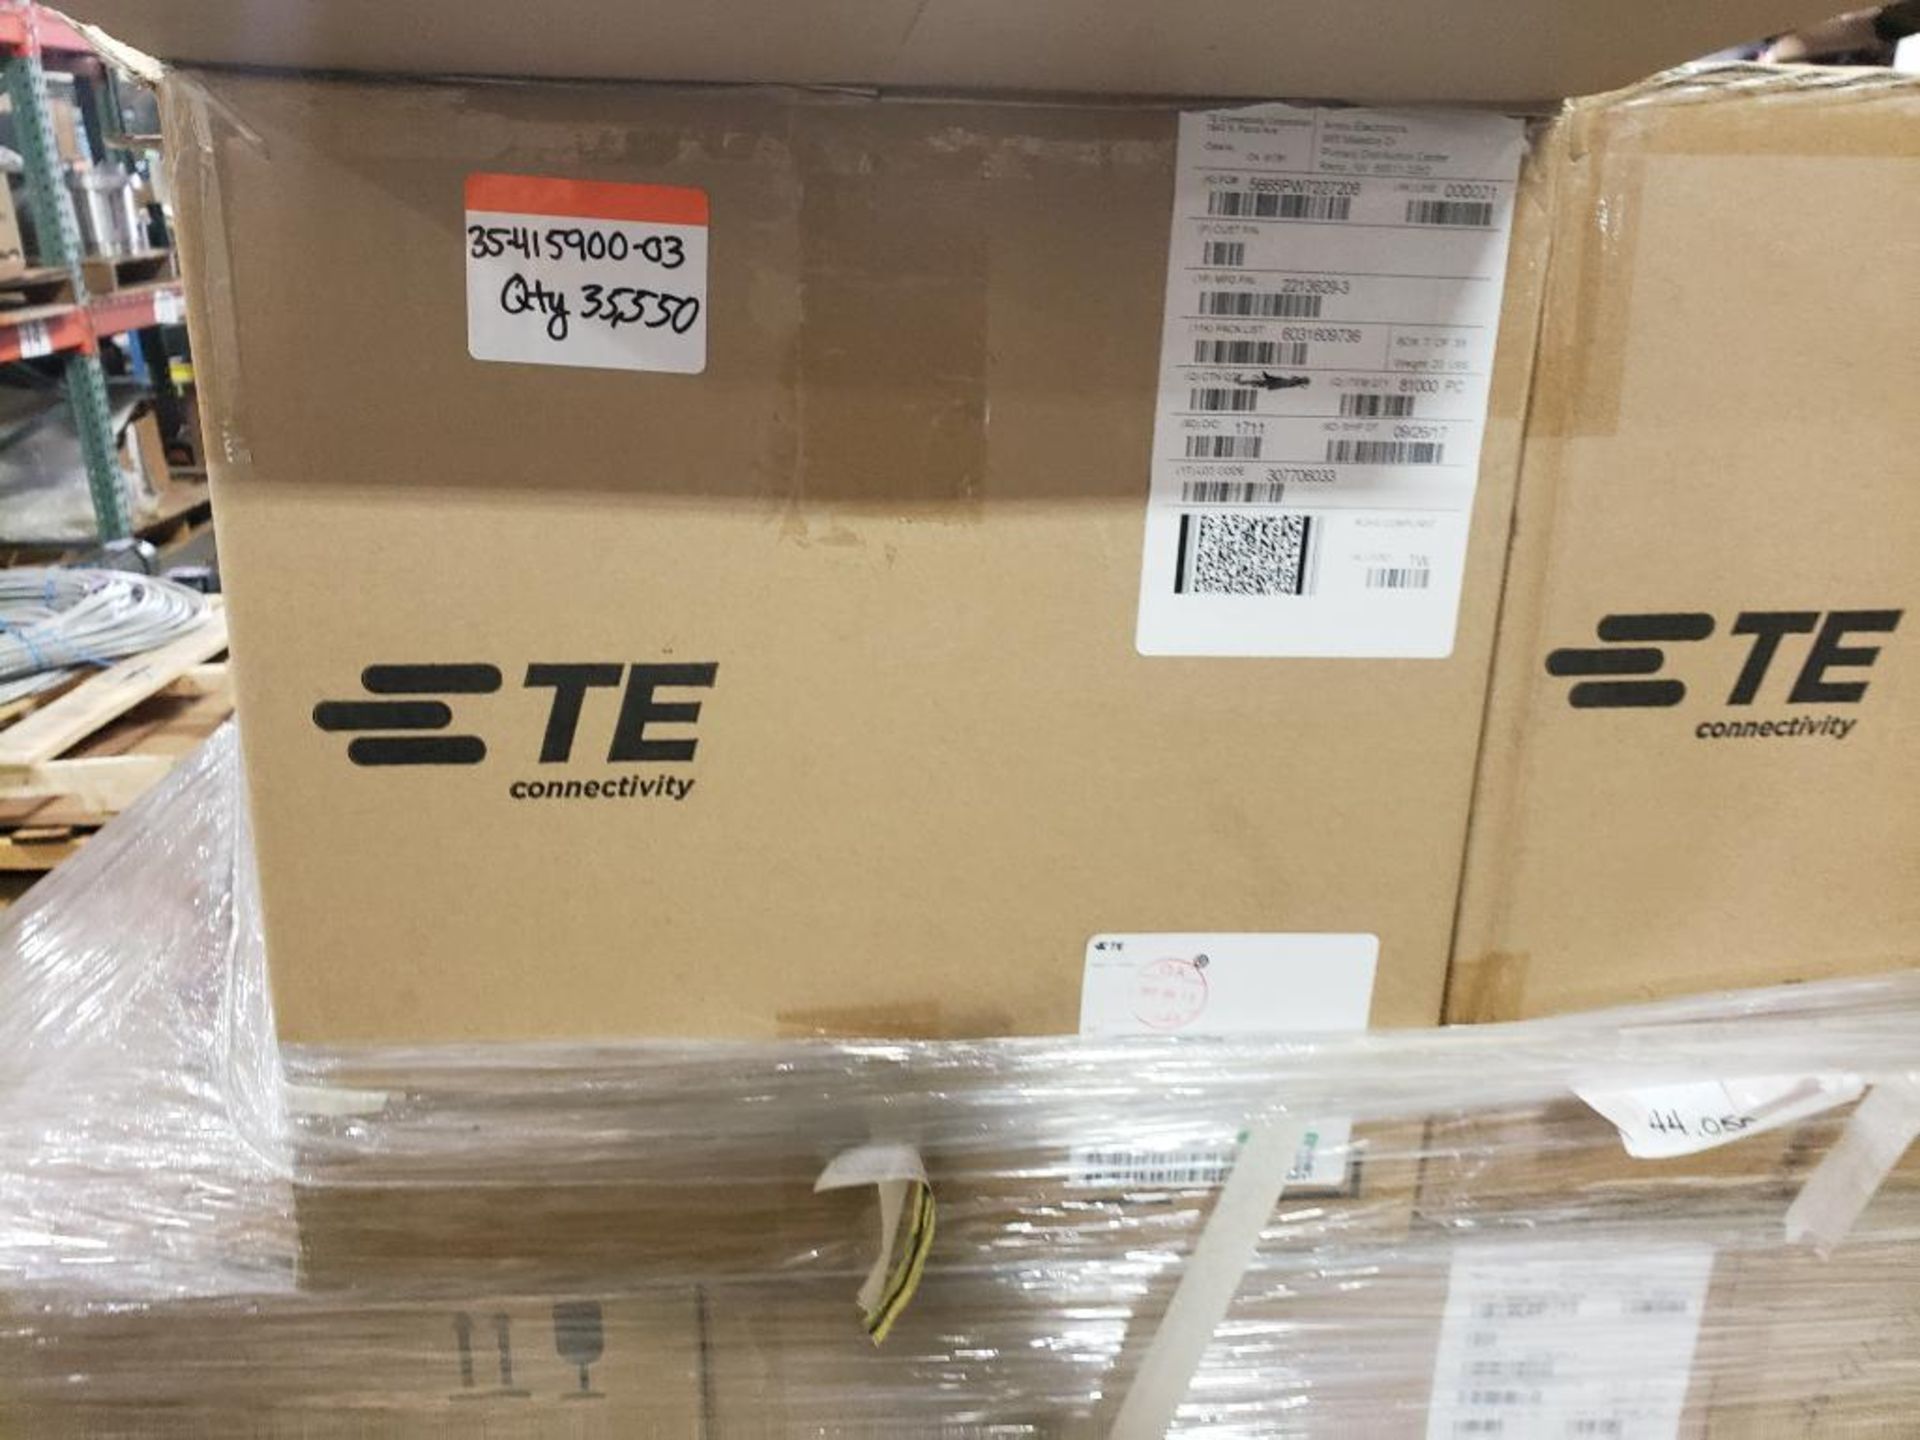 Qty 9000 - TE Connectivity part number 2213629-3. (4 bulk boxes of 9 reels) - Image 9 of 12